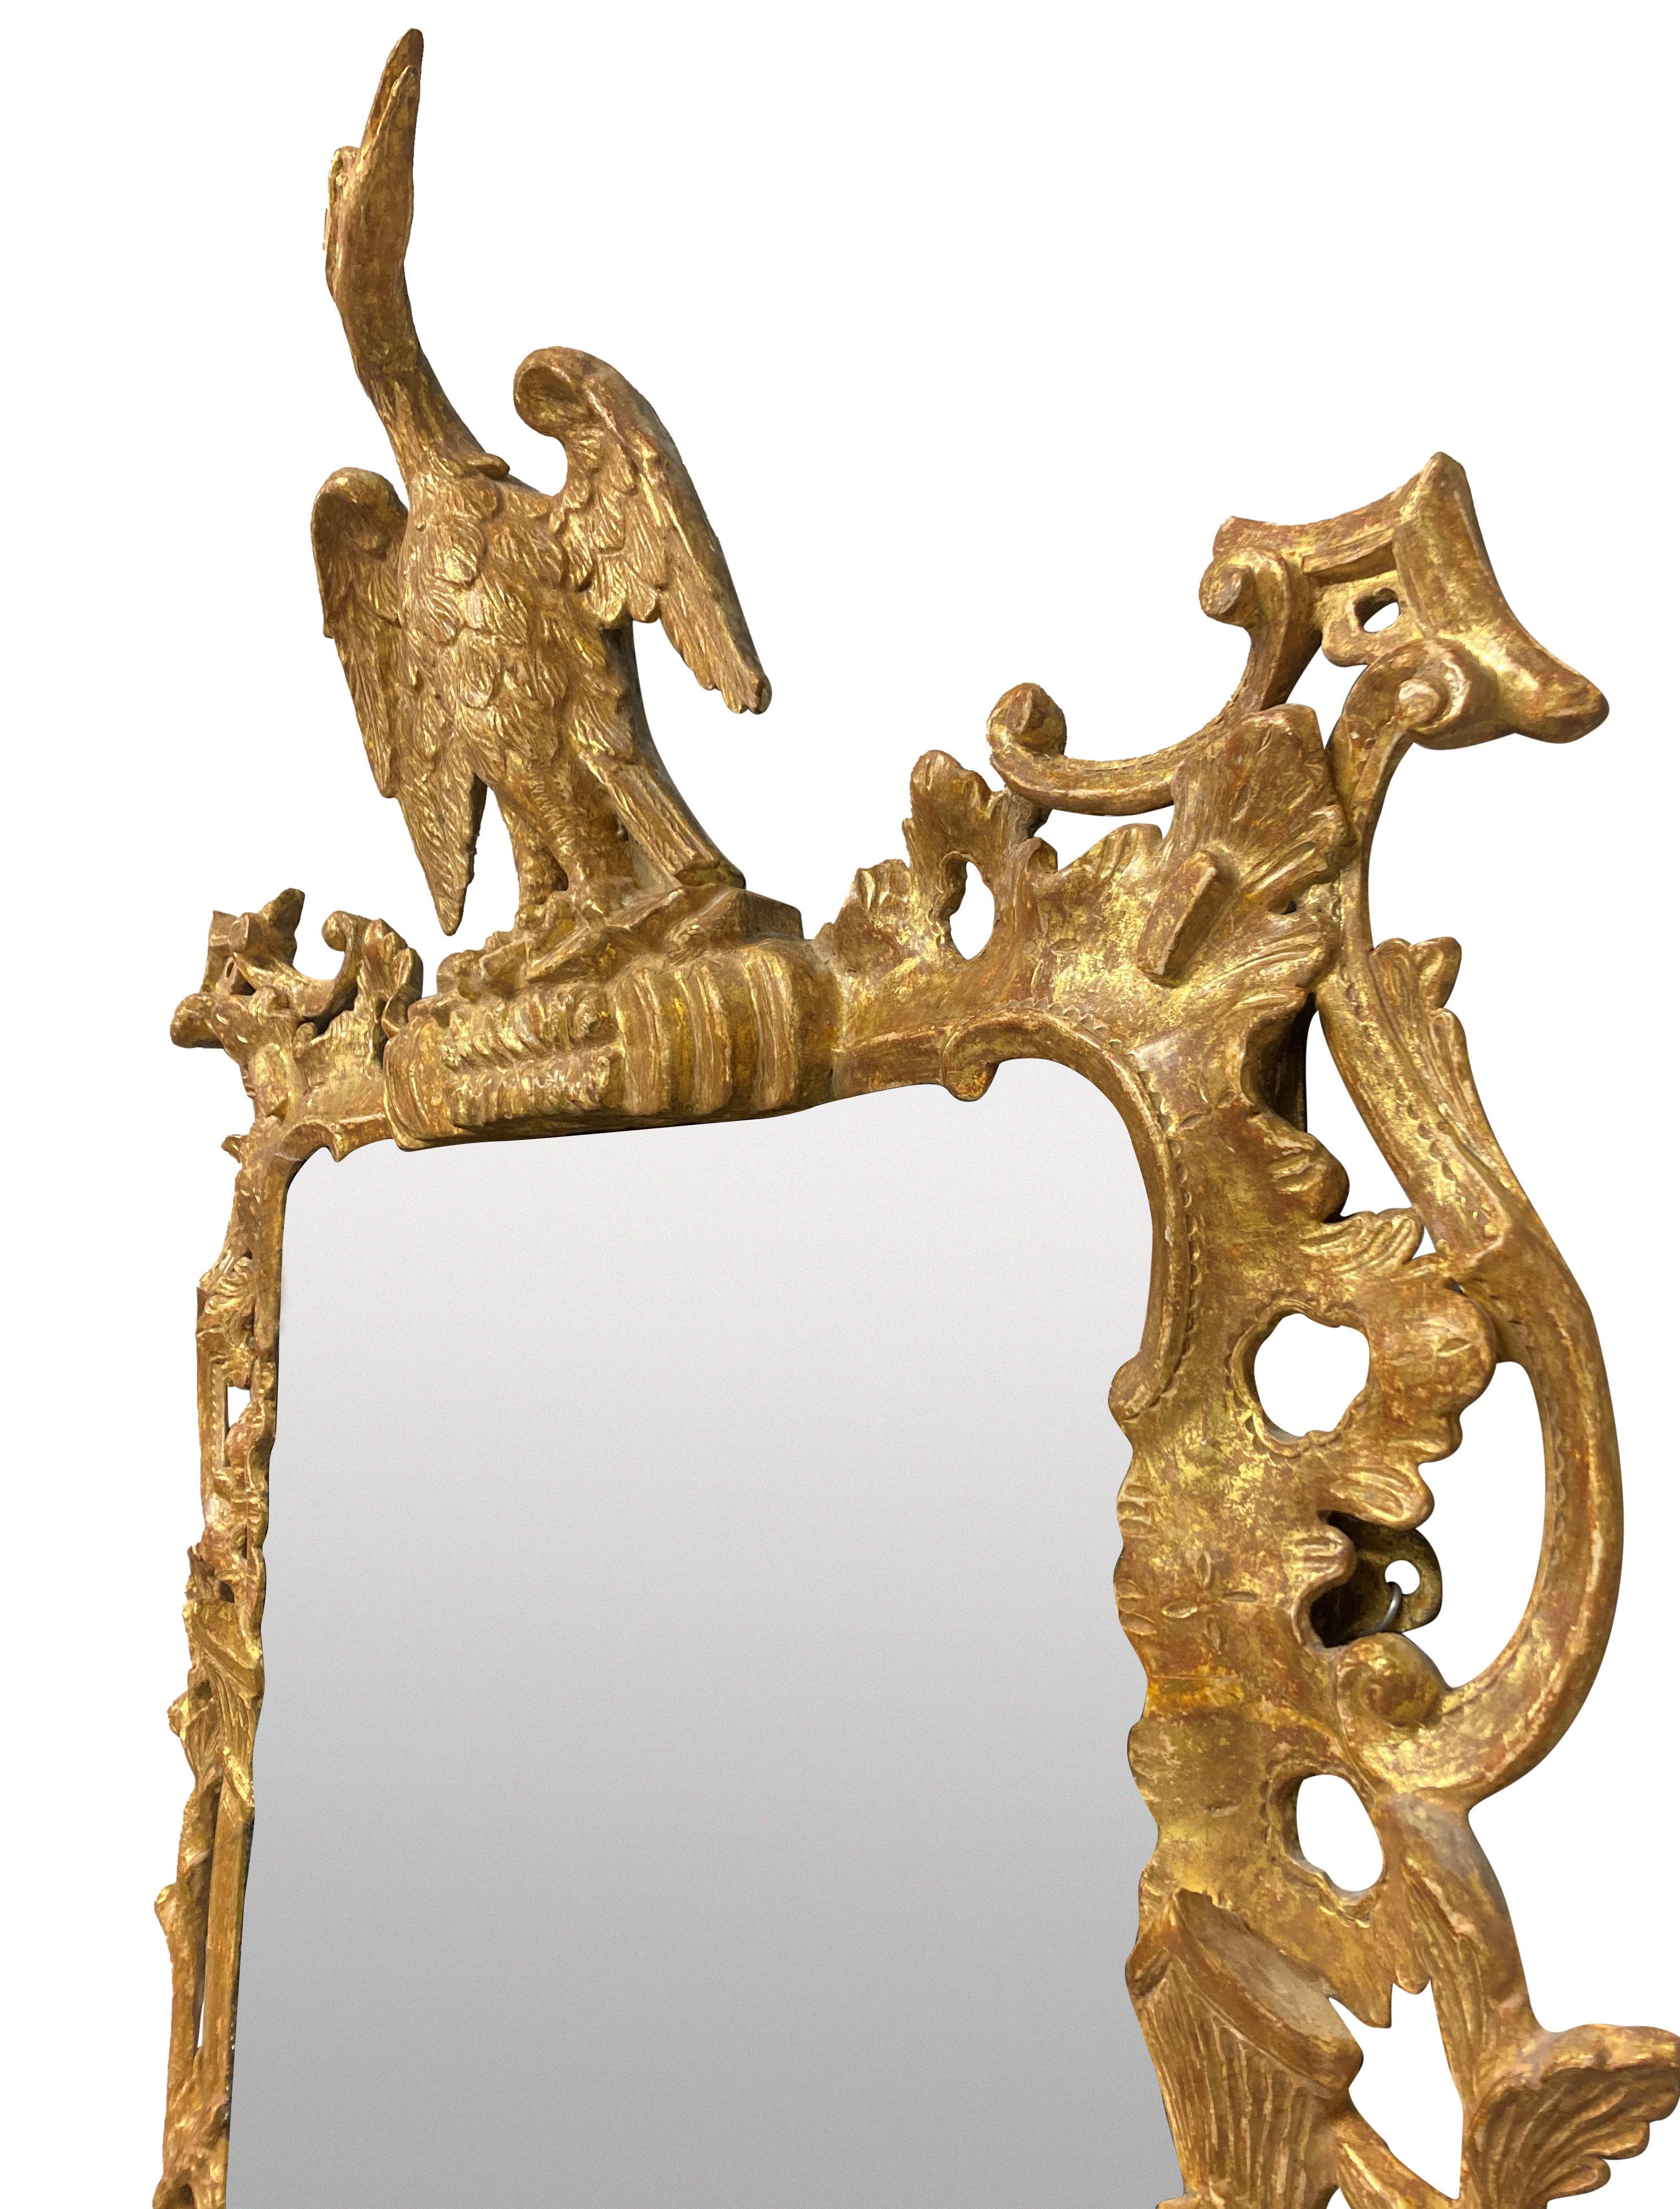 A fine English George III carved and water gilded Chippendale period mirror. The gilding is dry scraped, with foliage, pagodas and surmounted by a hoho bird. The mercury mirror plate is the original, with some foxing but in overall good condition.